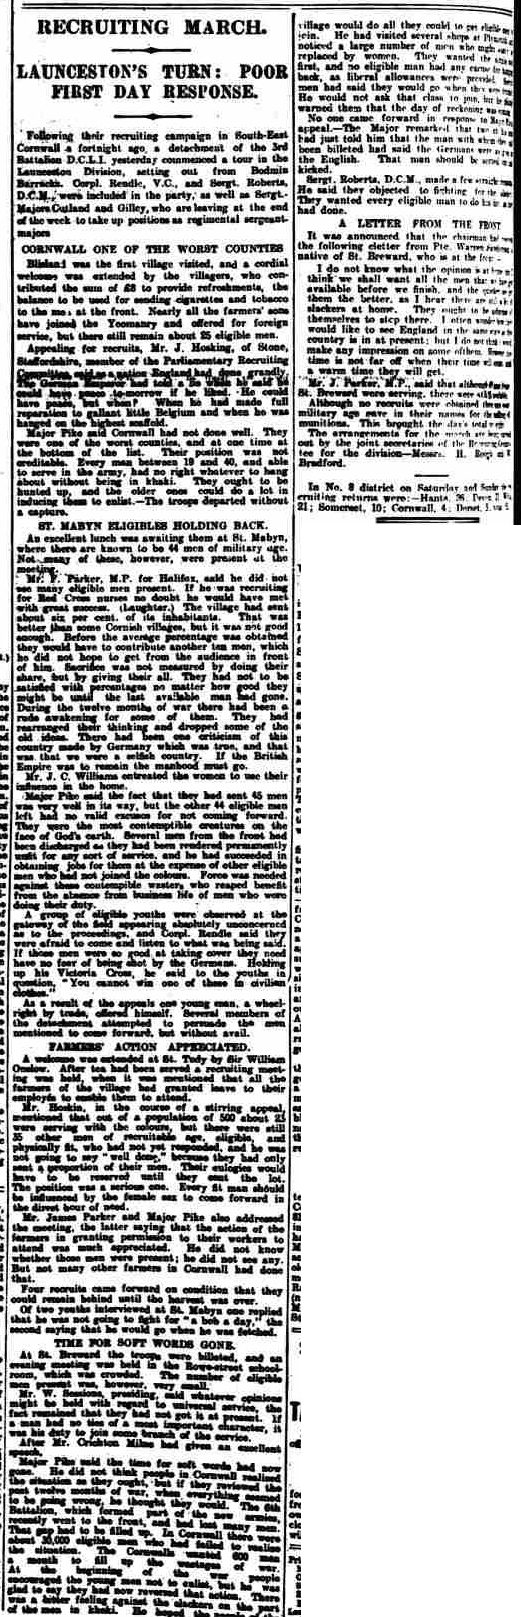 Western Morning News - Tuesday 10 August 1915 